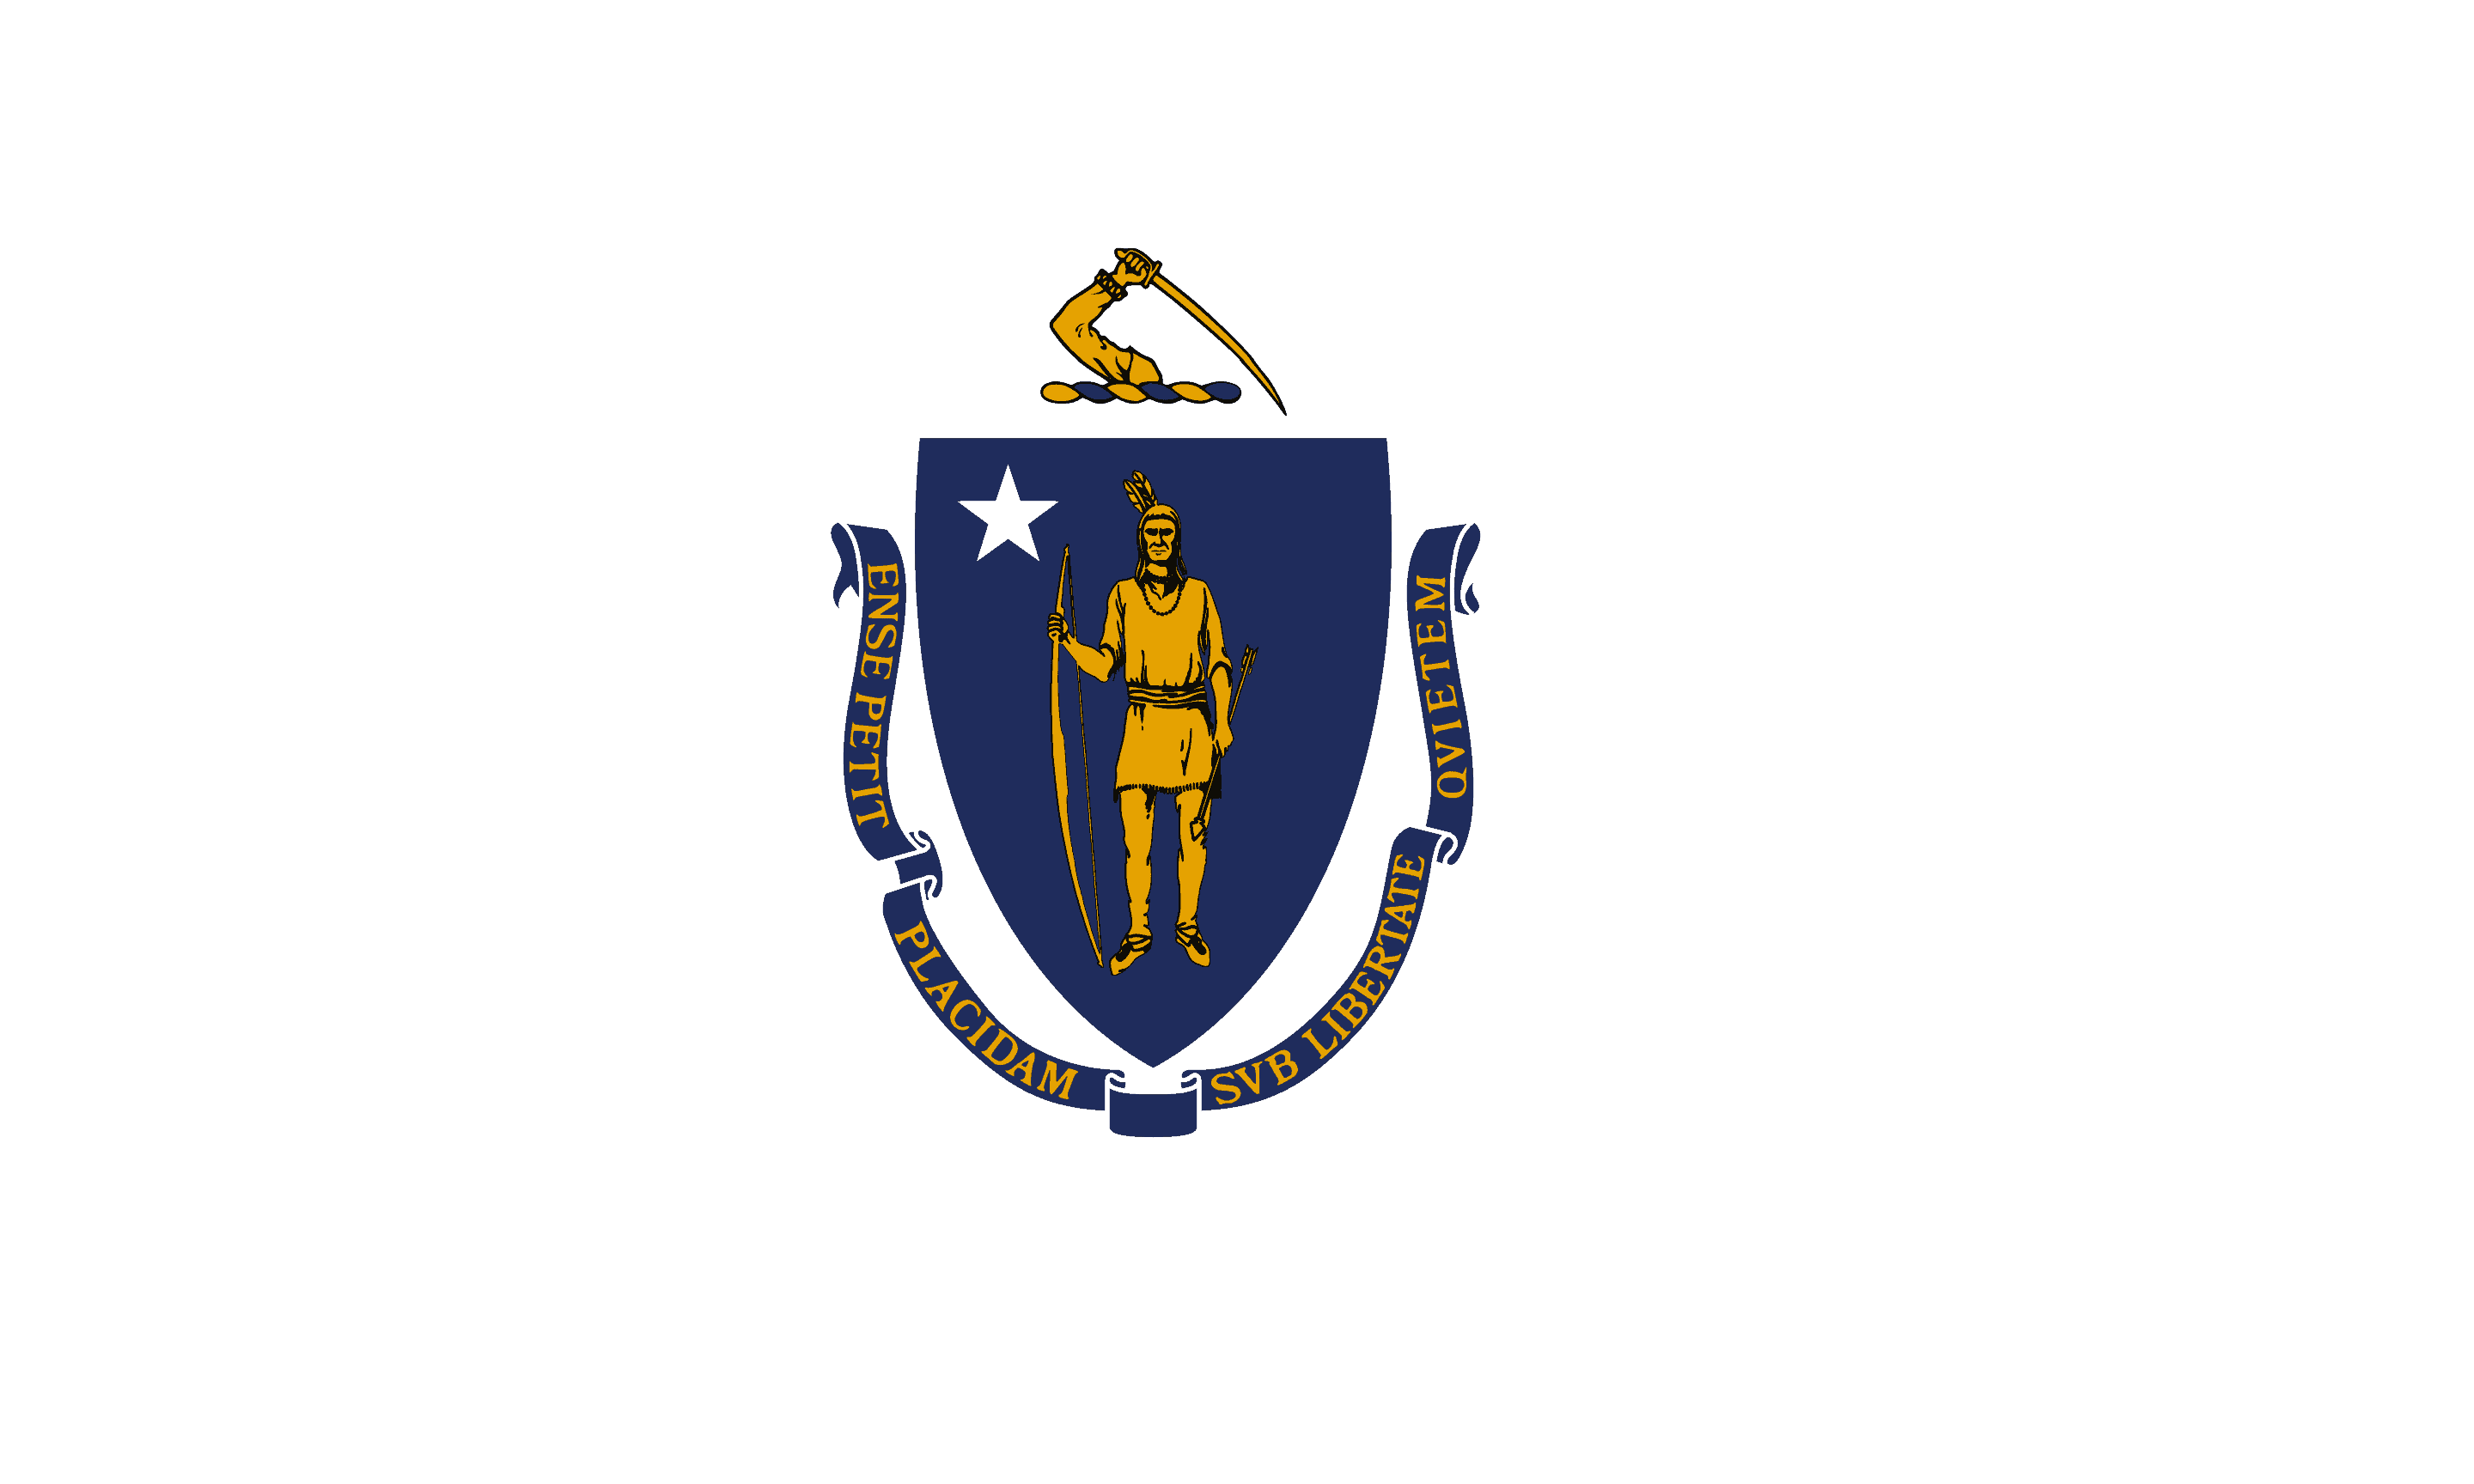 Drone Laws in Massachusetts